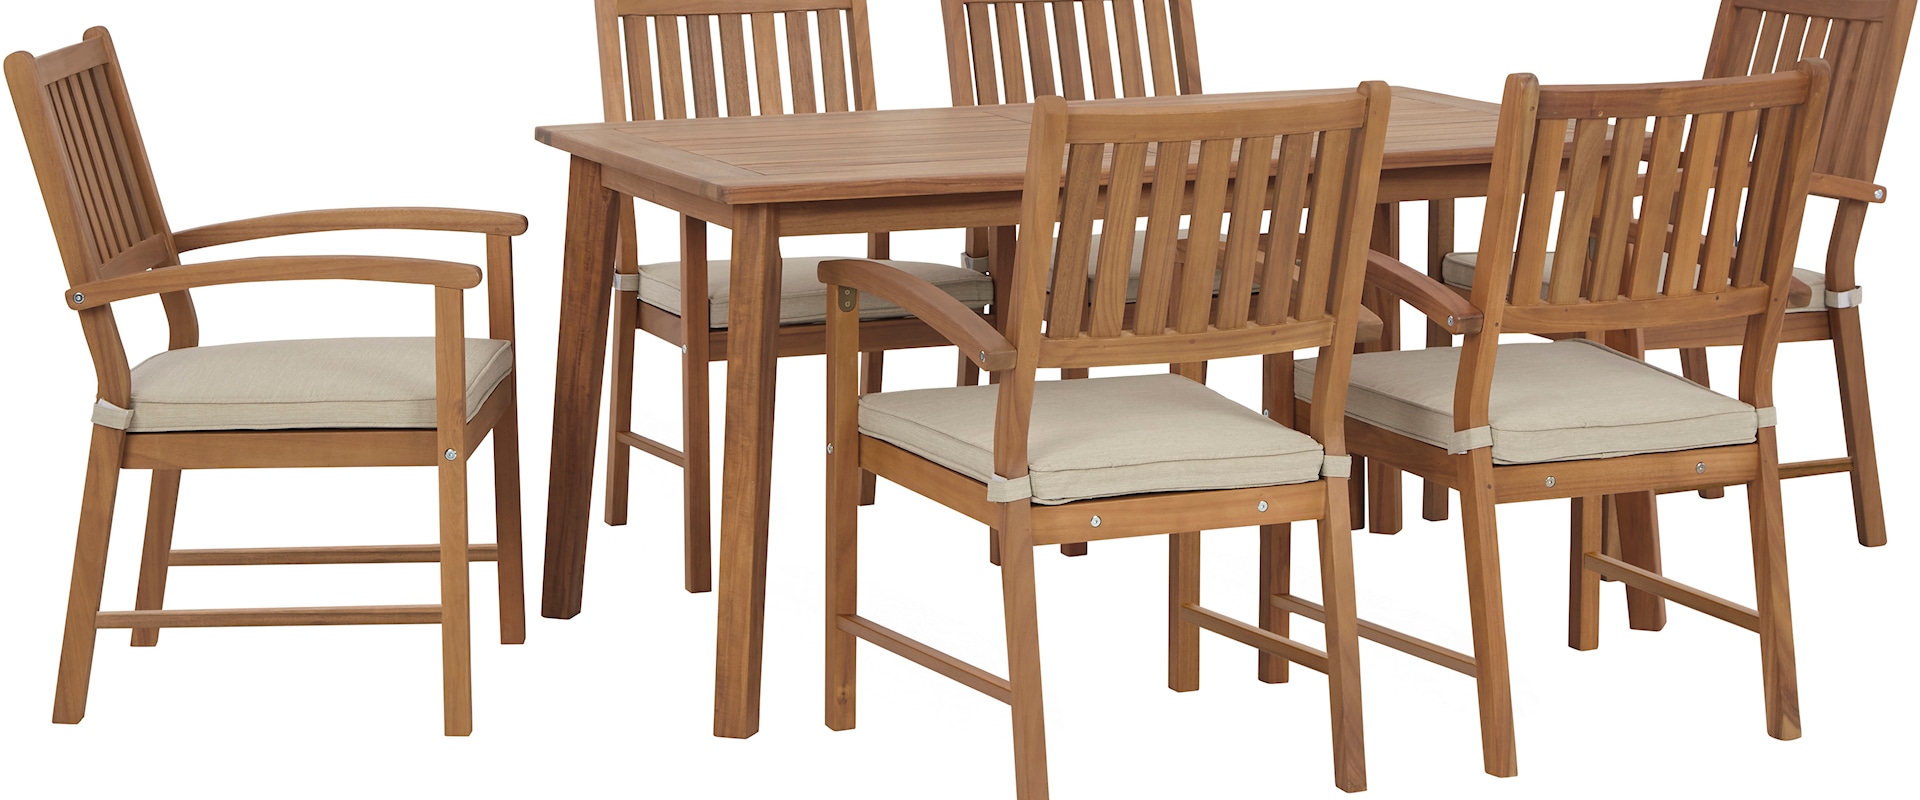 Outdoor Dining Table w/ 6 Chairs